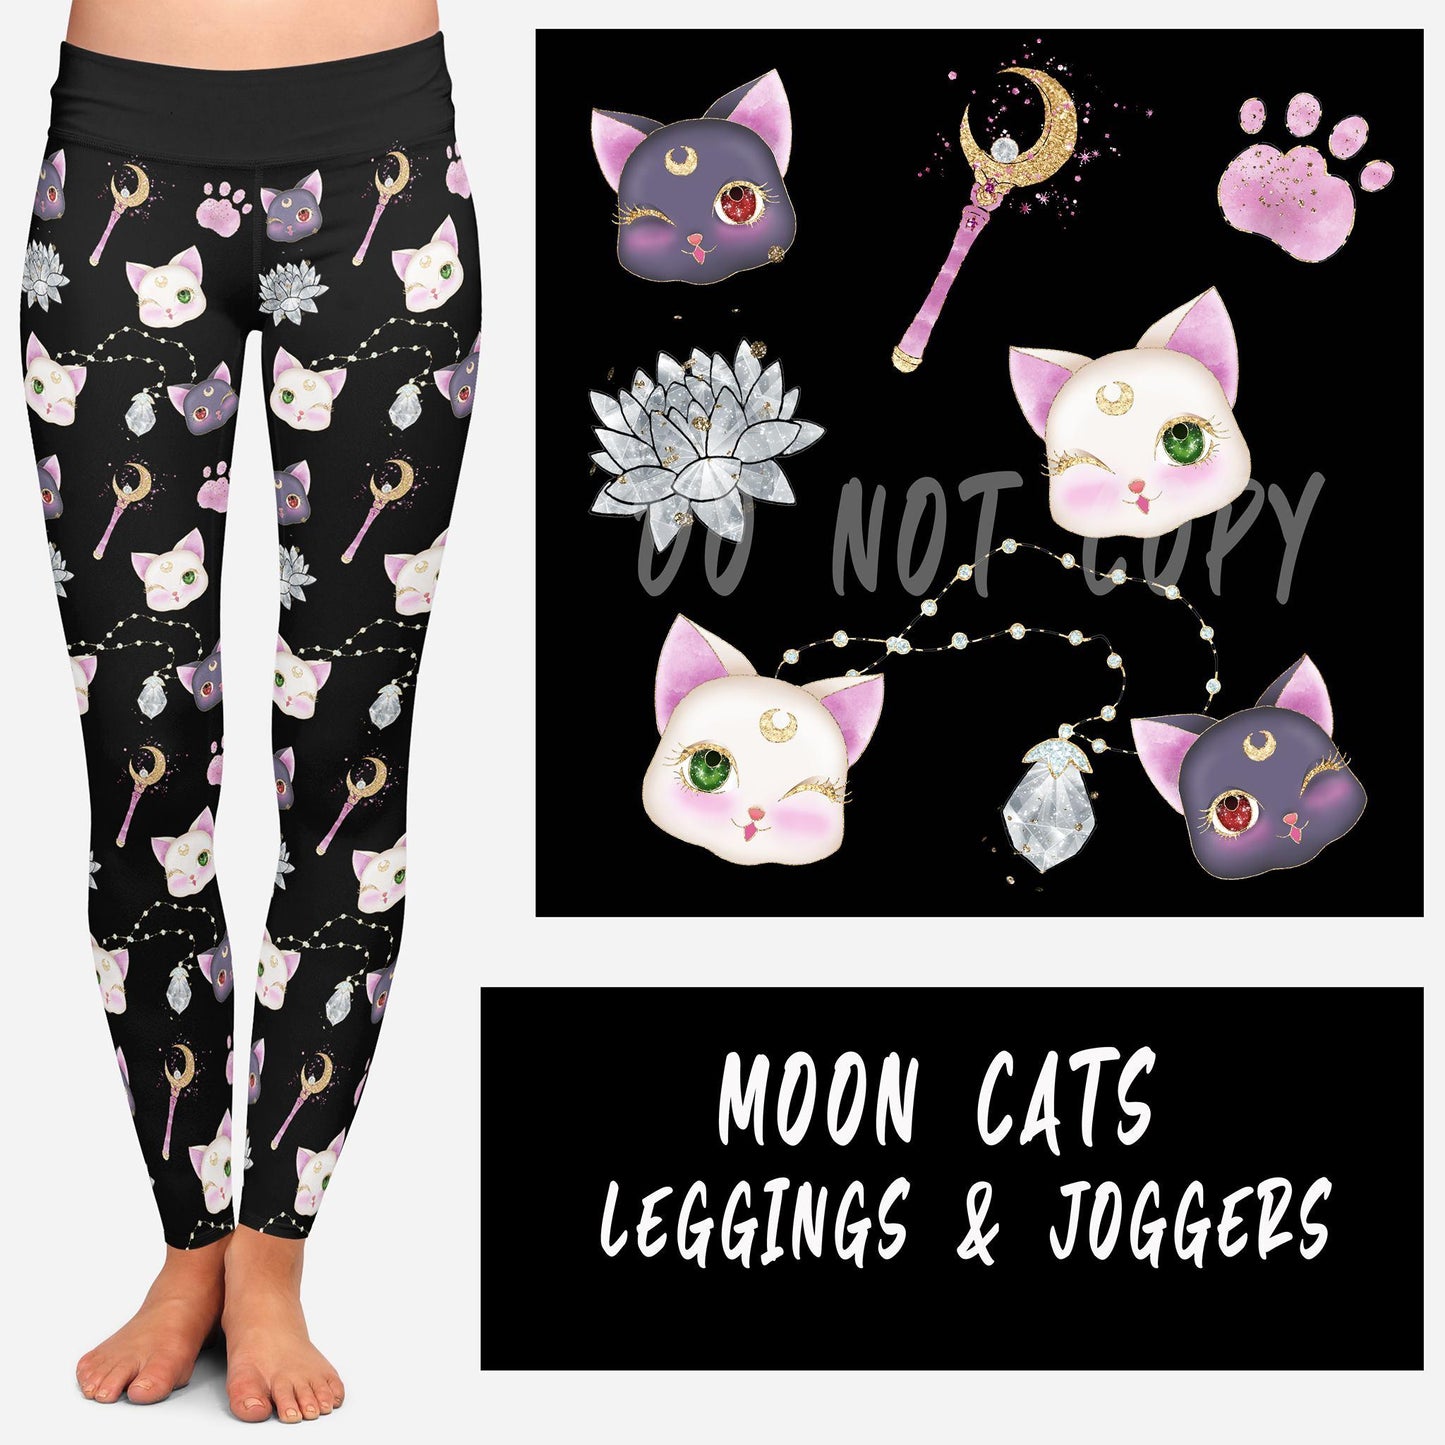 MOON CATS LEGGINGS AND JOGGERS